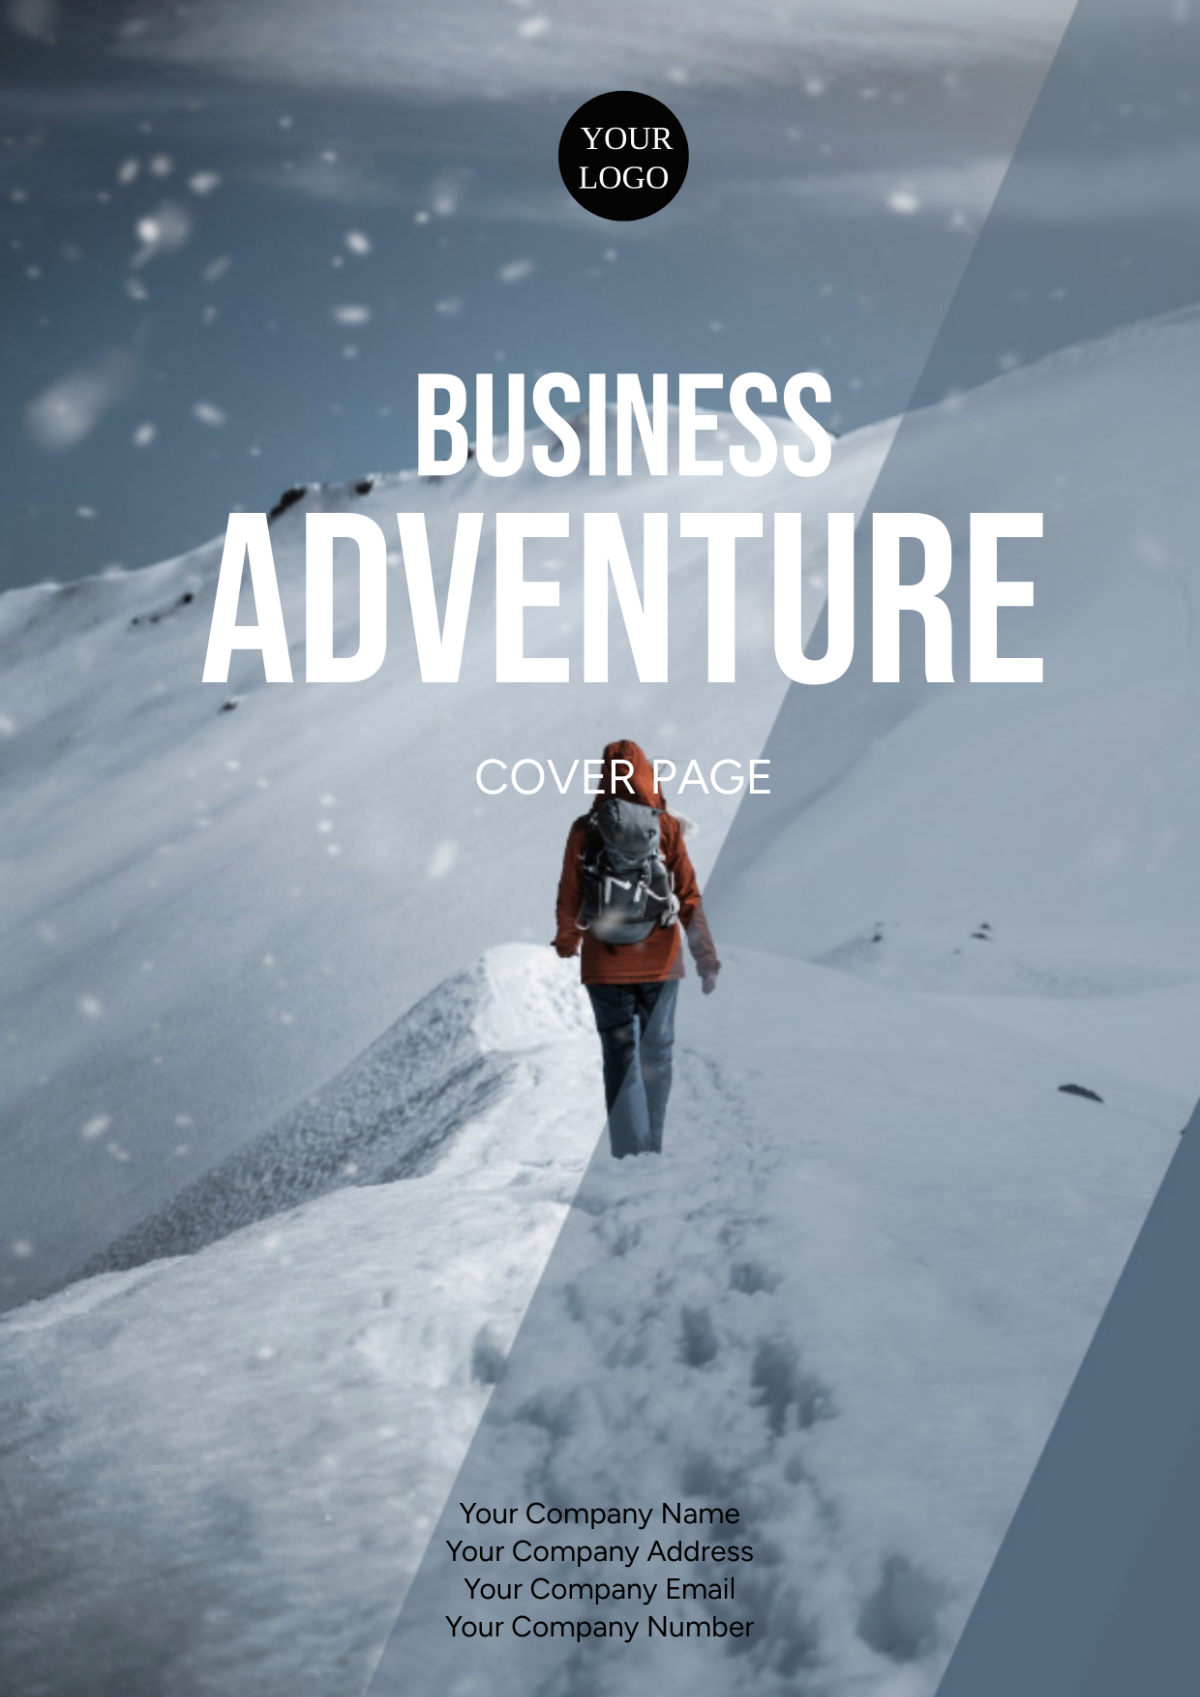 Adventure Tours Business Cover Page